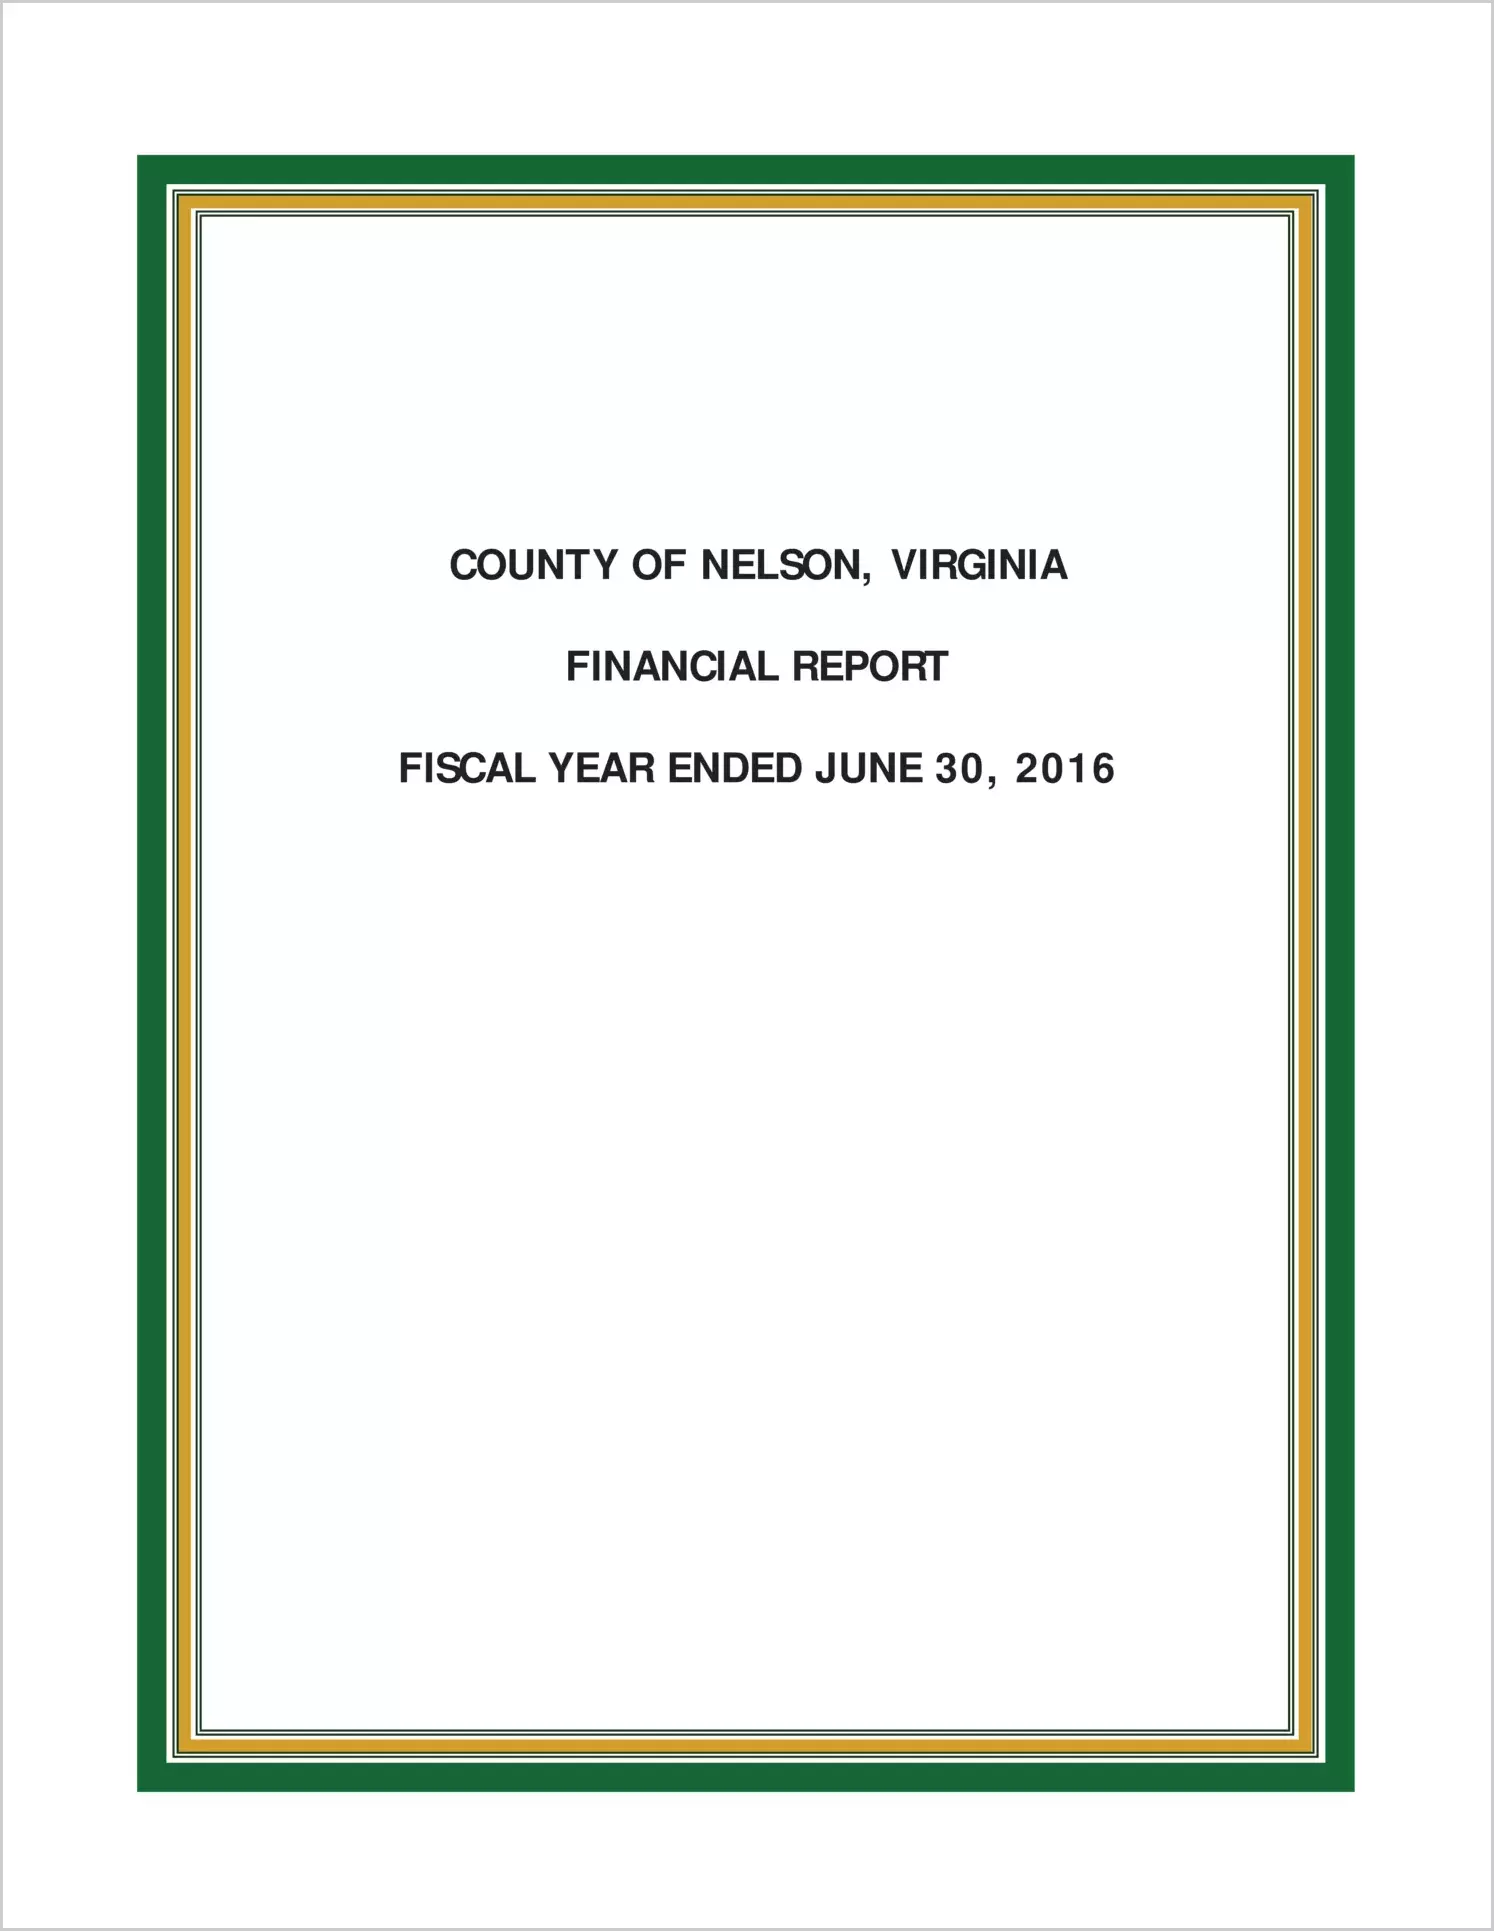 2016 Annual Financial Report for County of Nelson